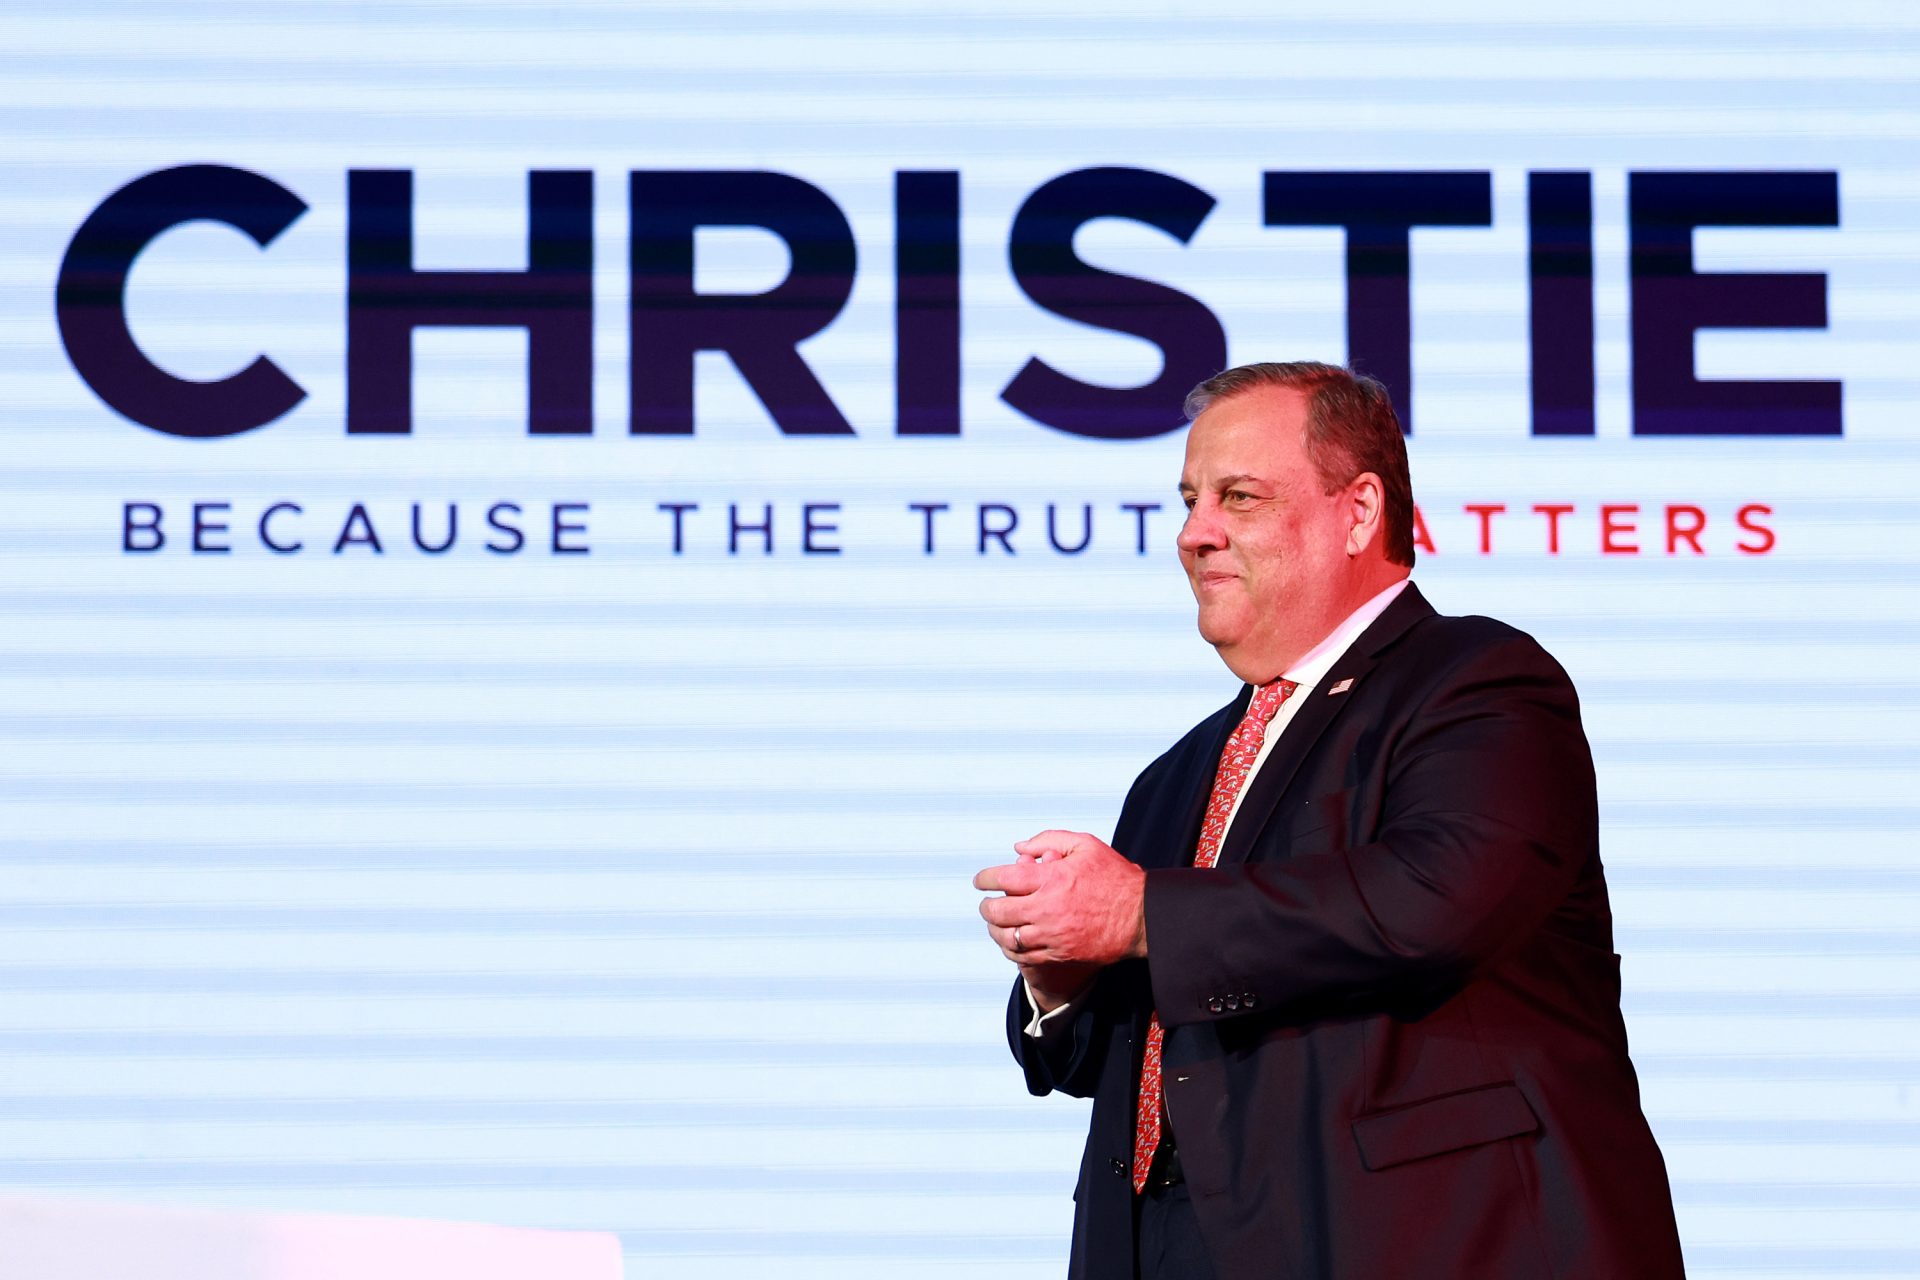 Criticism from Chris Christie 